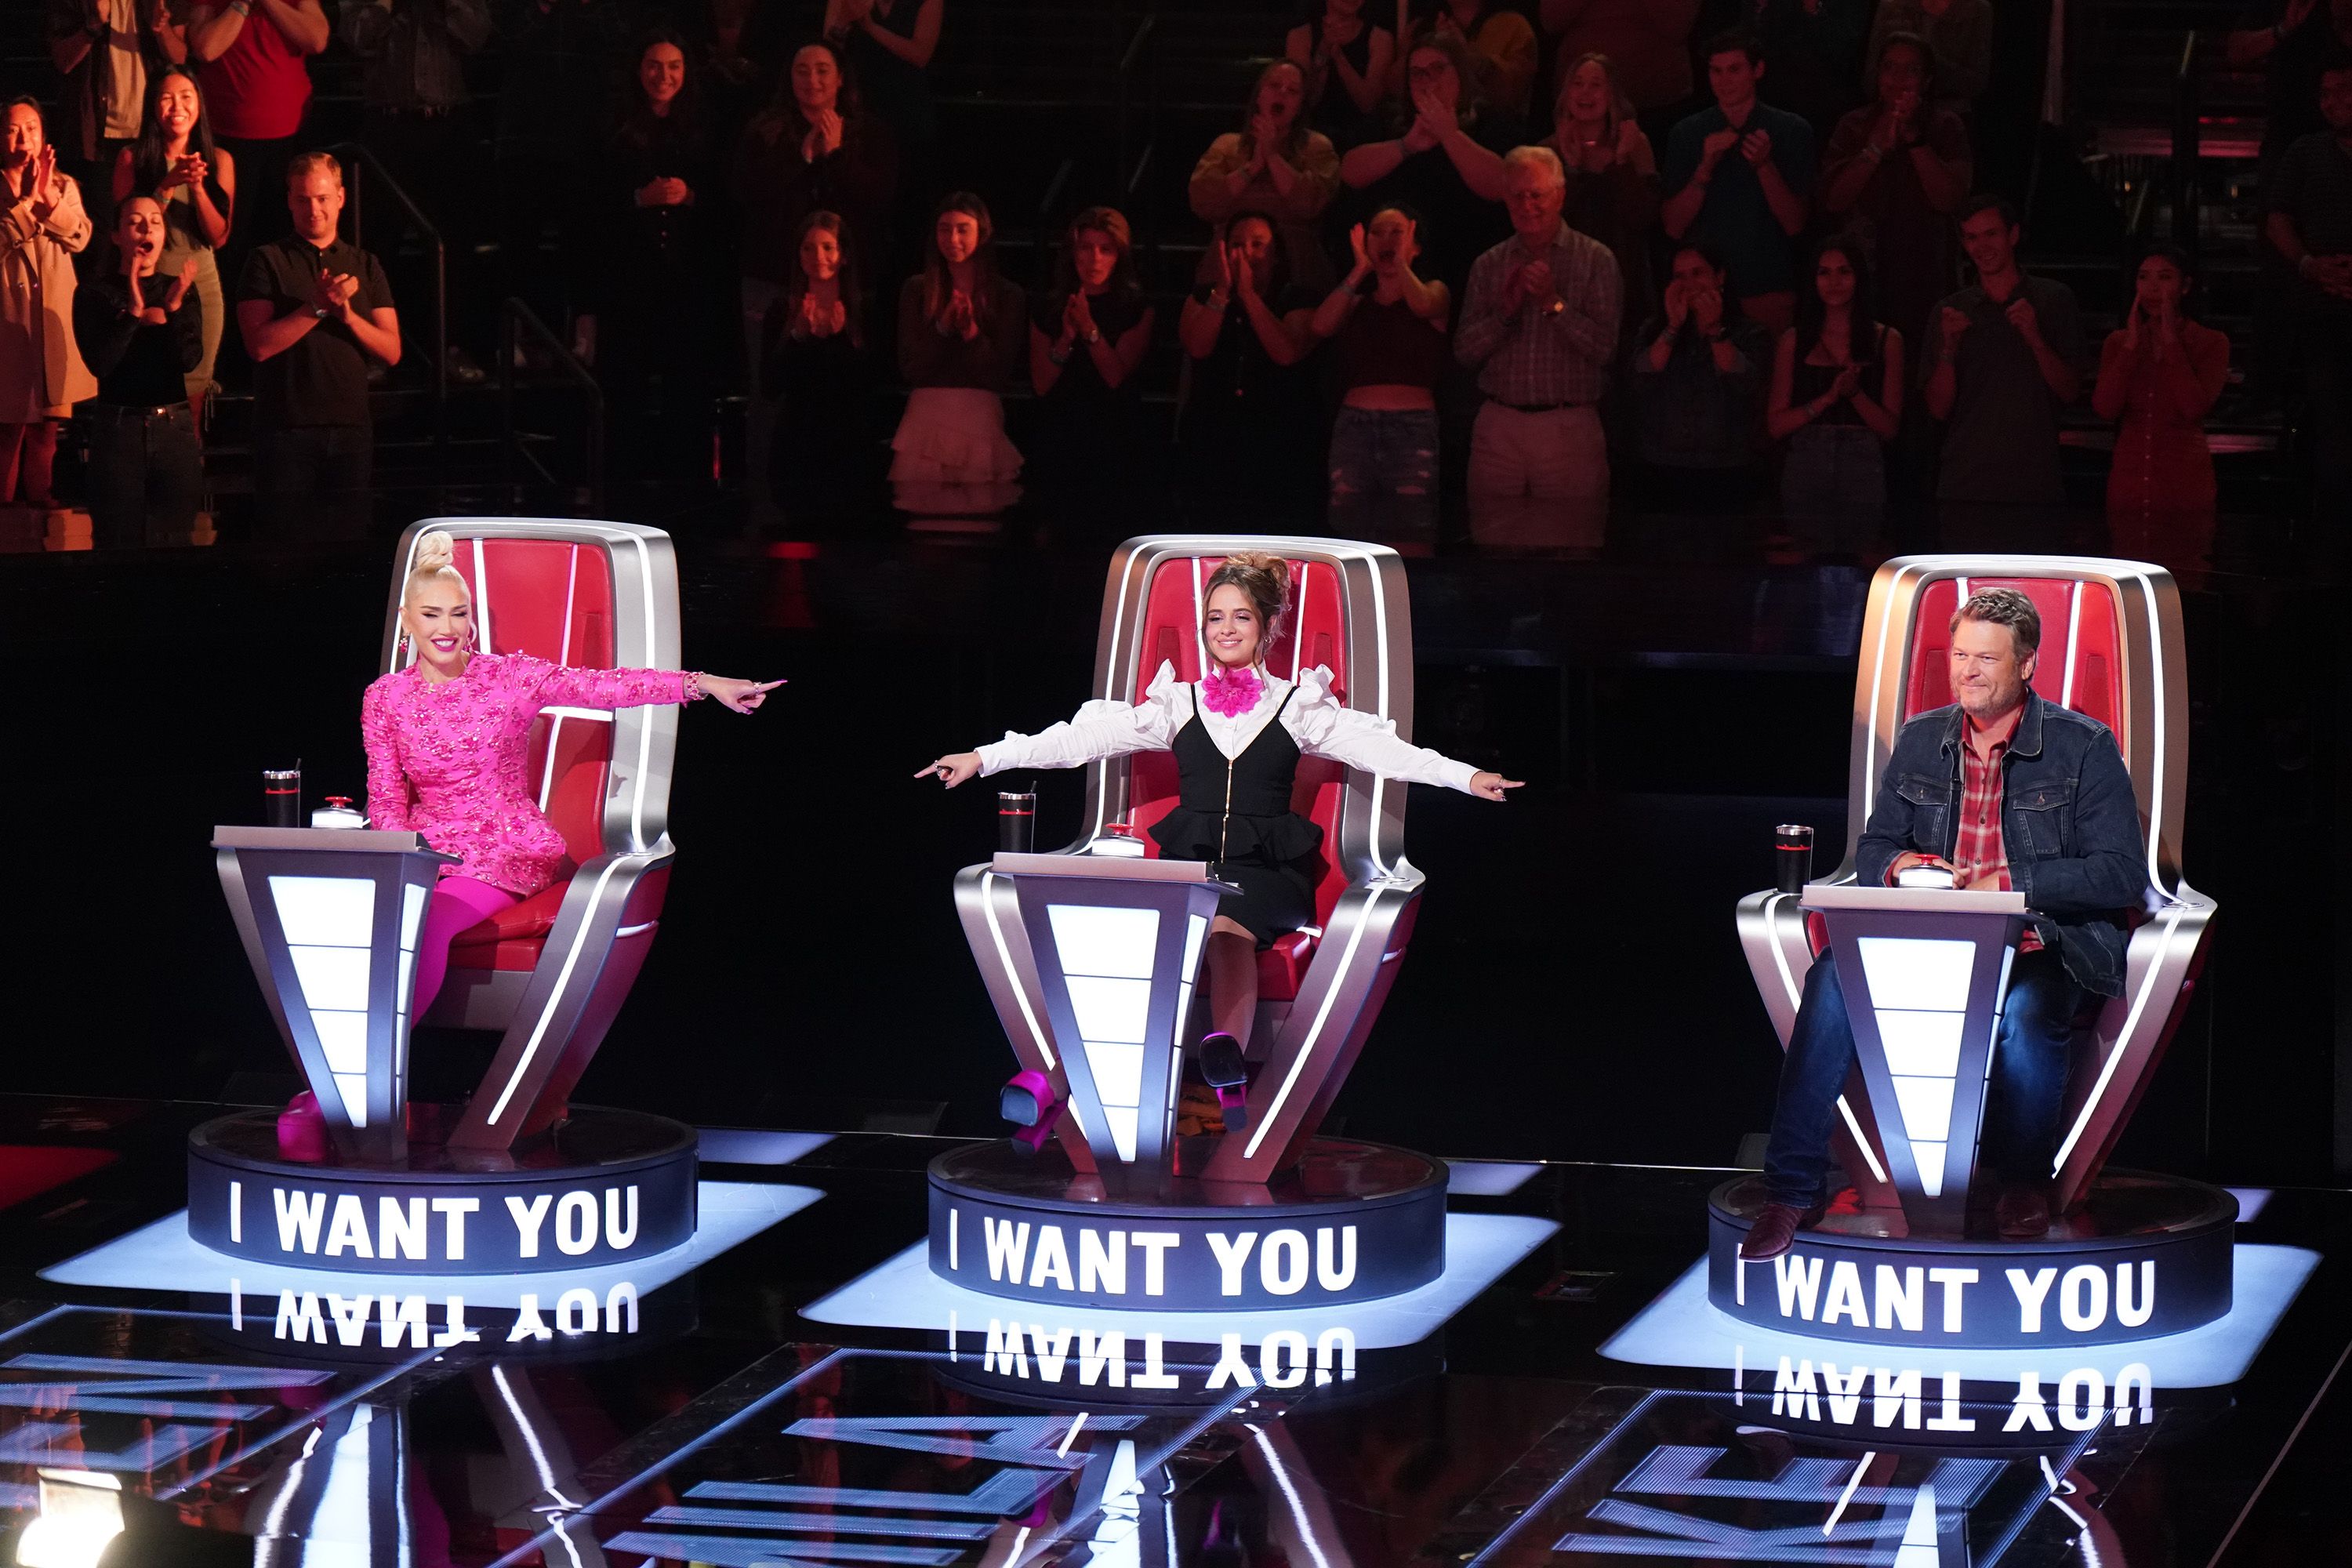 The Voice' Coaches Cover 'Can't Take My Eyes Off of You': Watch